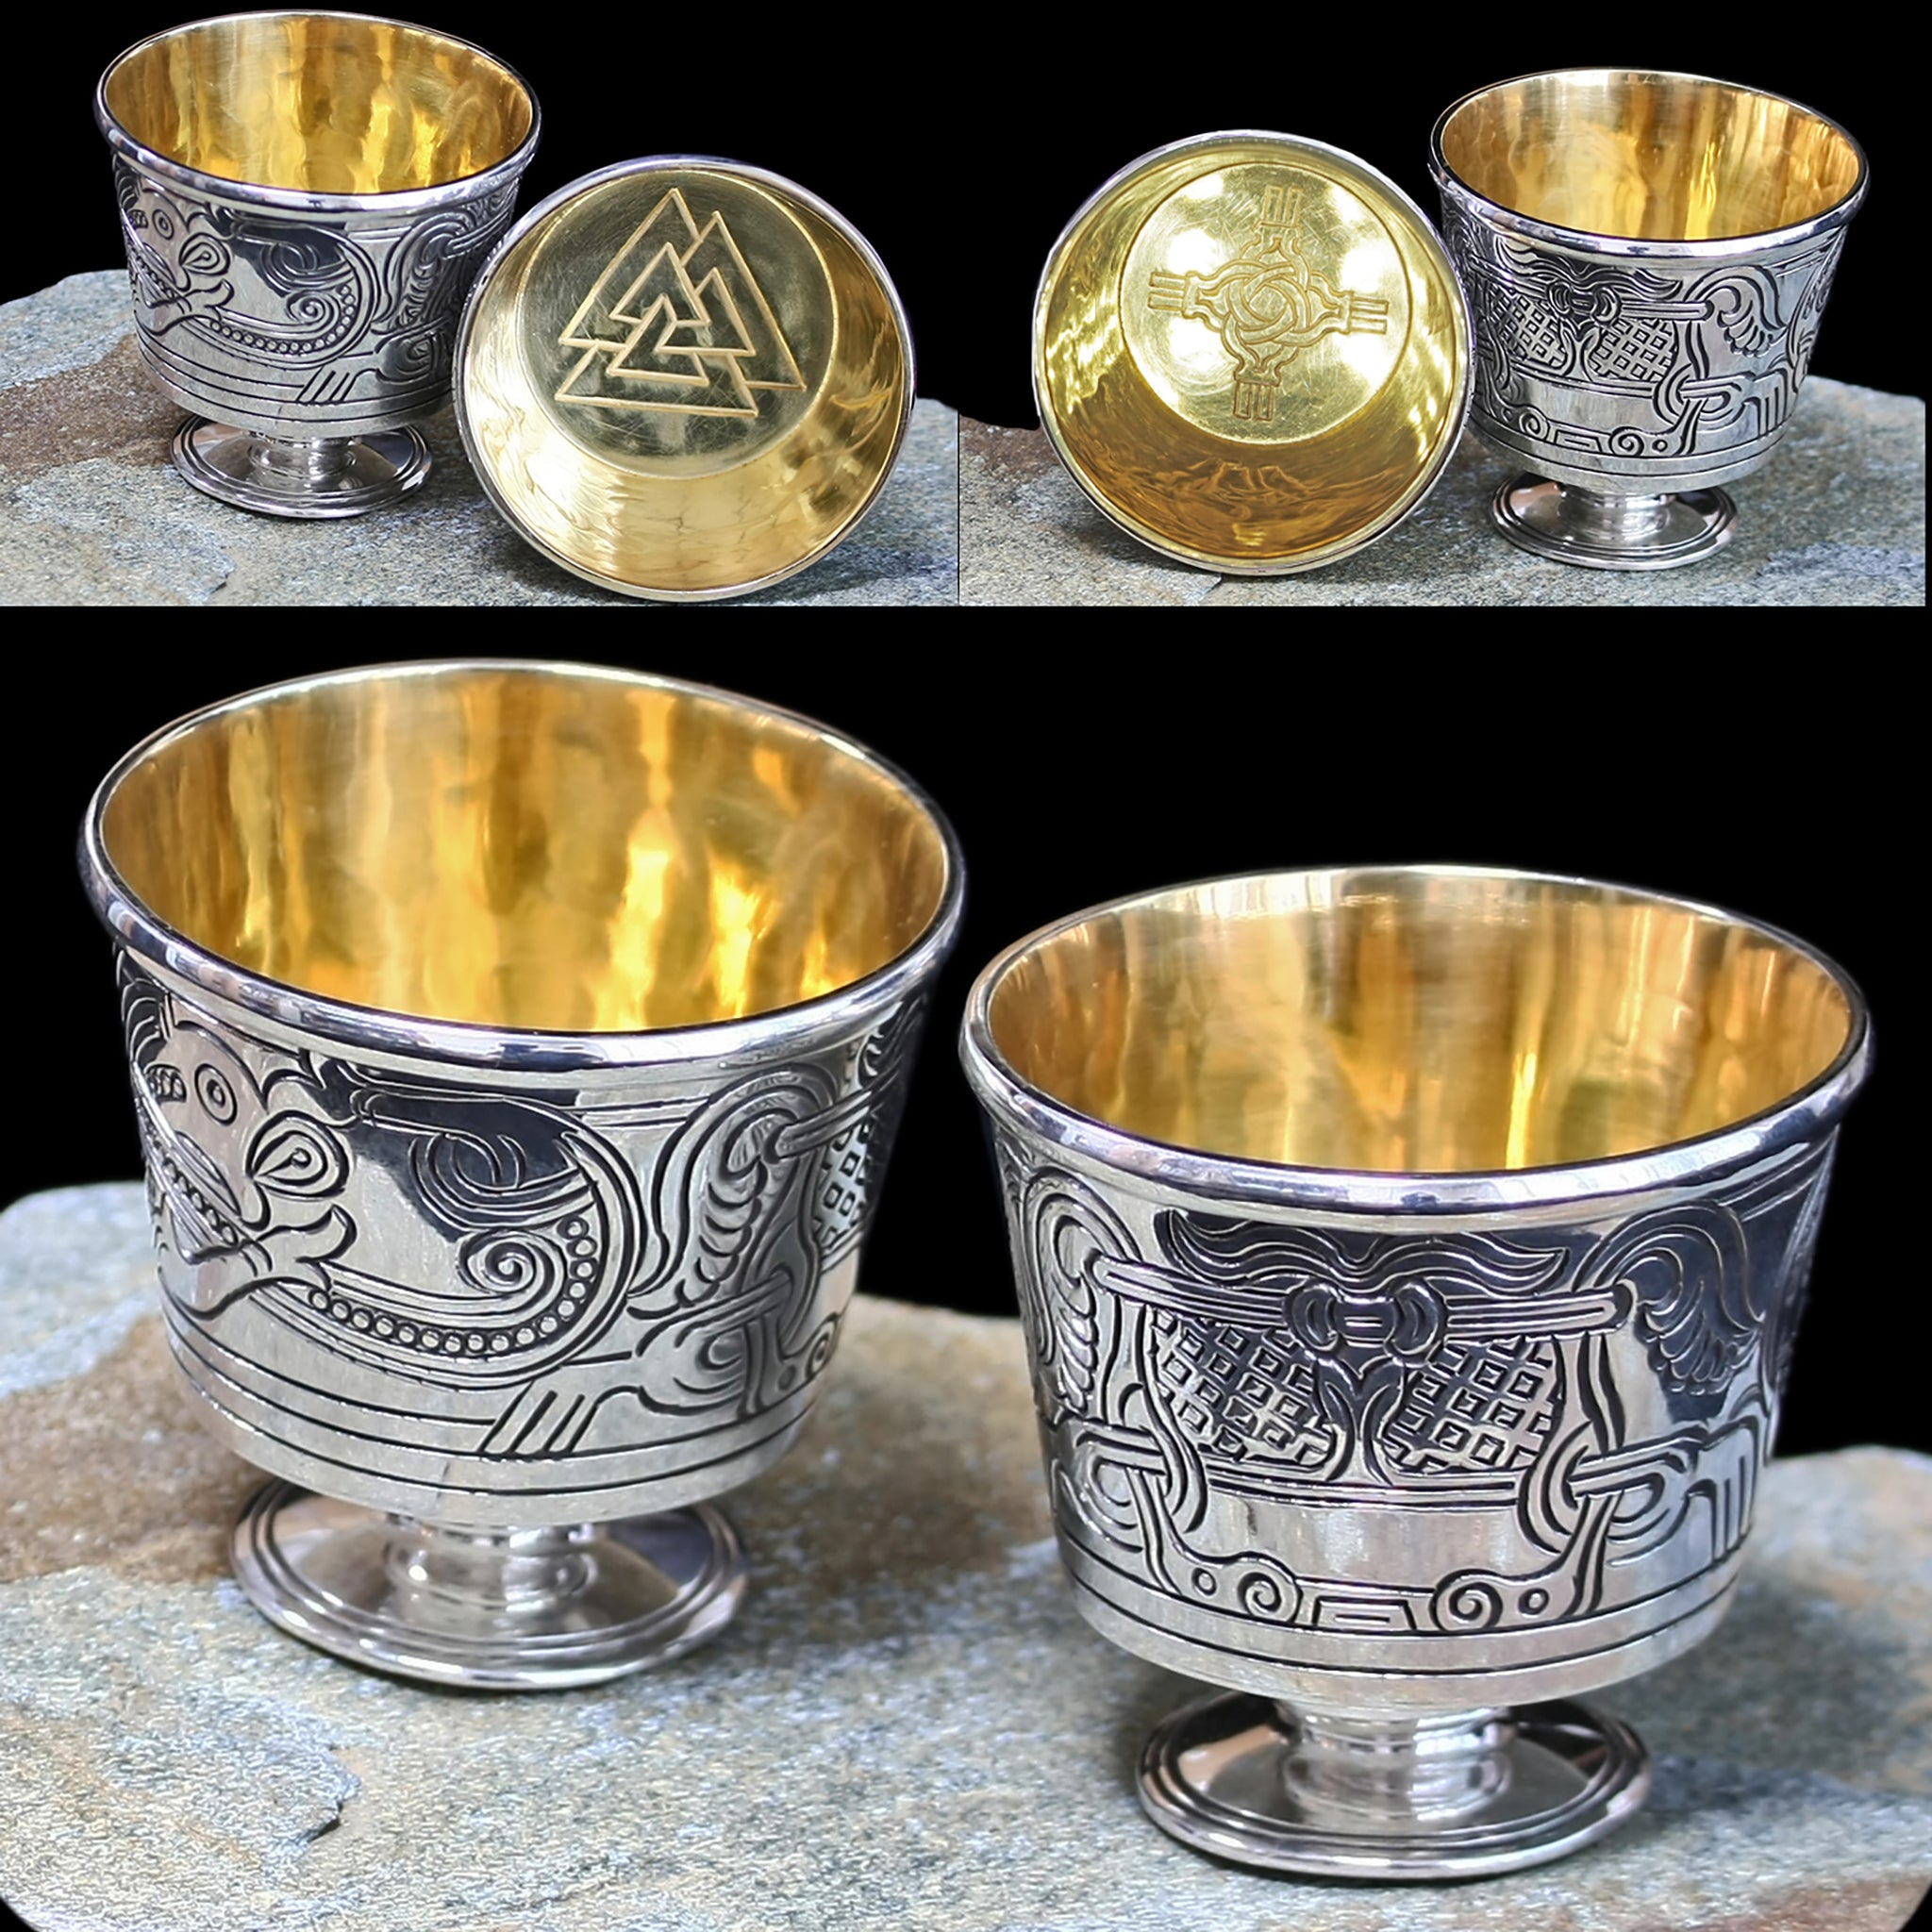 Handmade Silver and Gold Replica Jelling Cups - Rare Viking Jewelry